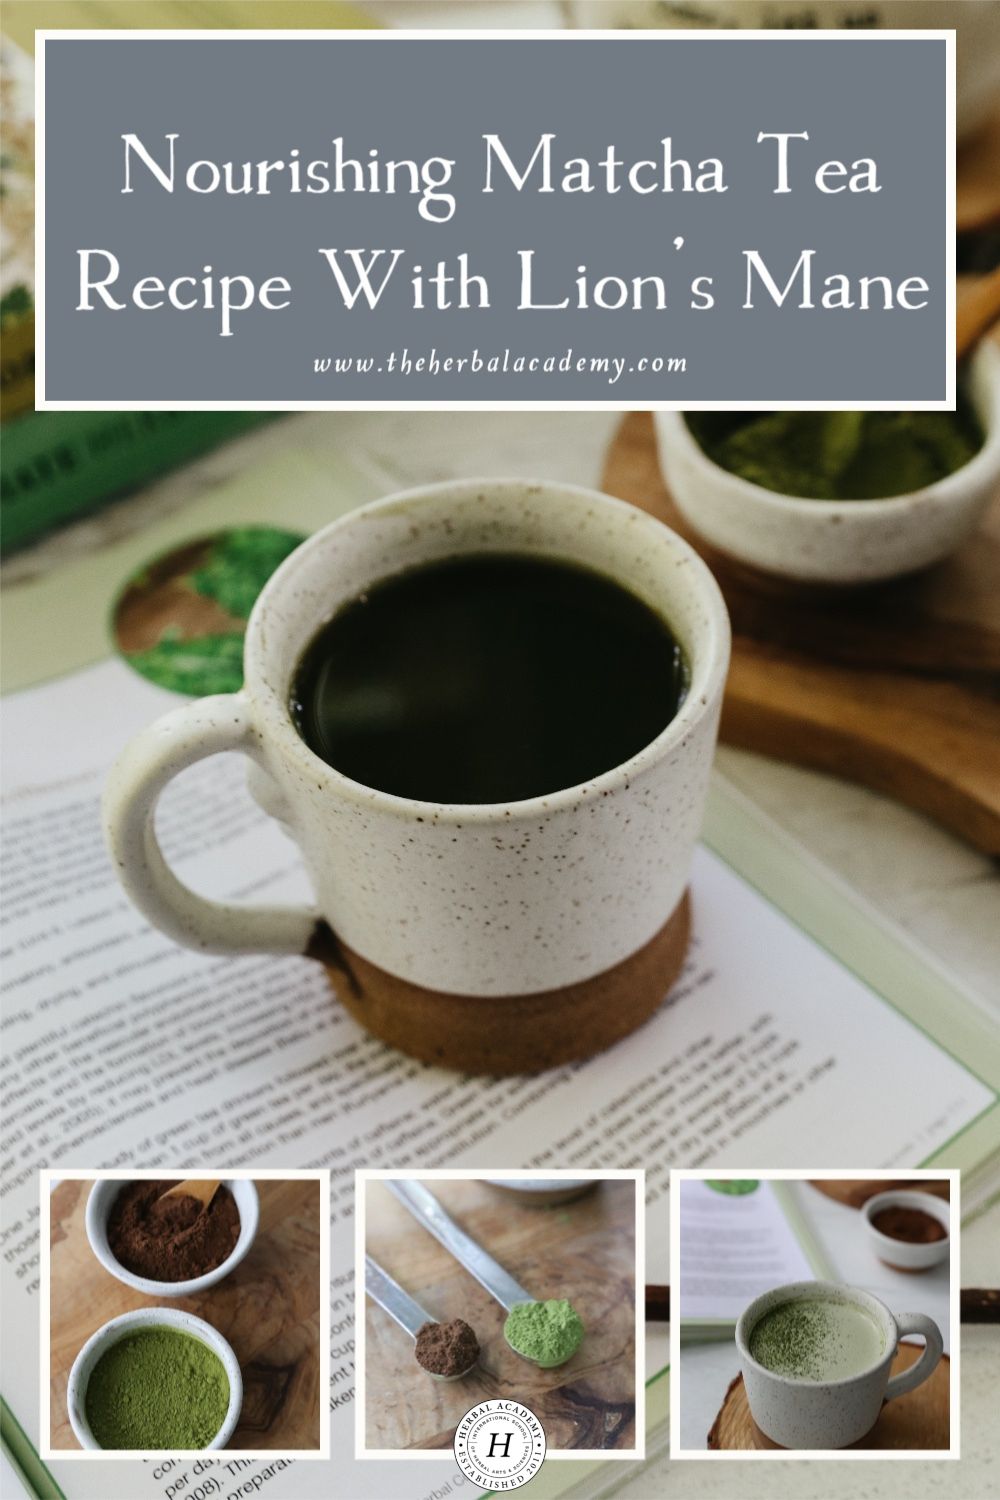 Nourishing Matcha Tea Recipe with Lion’s Mane | Herbal Academy | Want to start your day with energy, but skip the intensity of coffee? Look no further than this Lion’s Mane Matcha recipe!